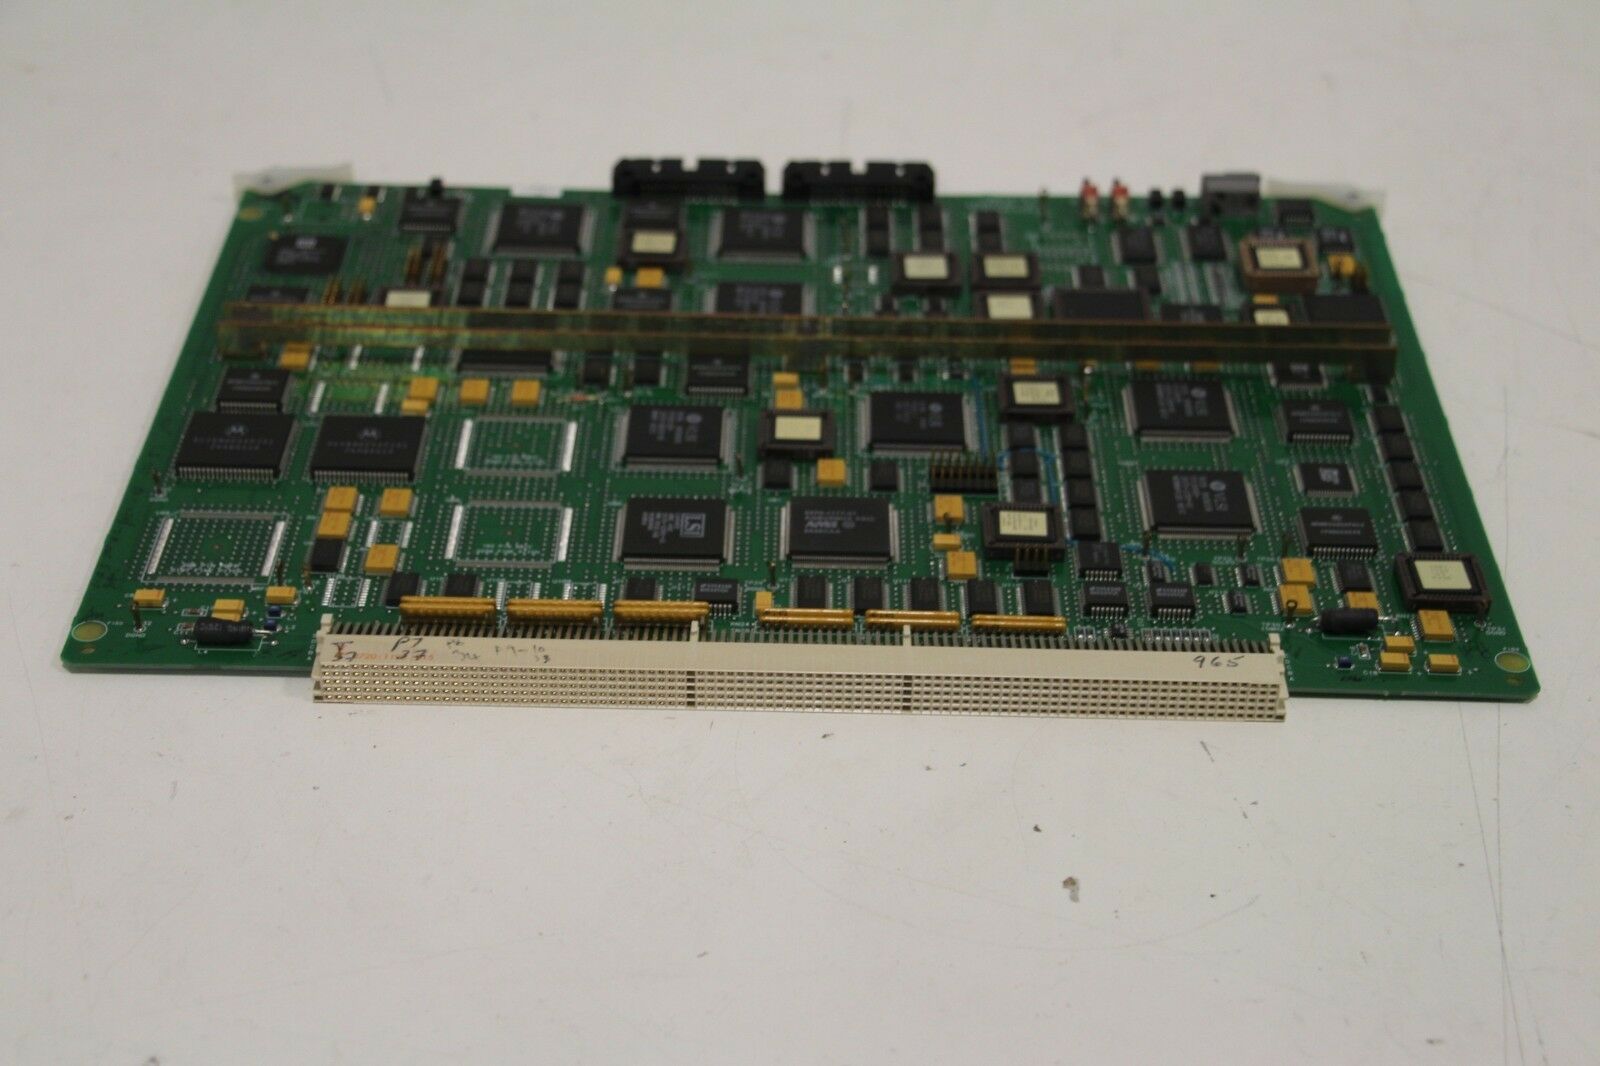 Philips ATL HDI-3000 Ultrasound AIFOM PCB ASSY 7500-0965-05 2500-0929-01A DIAGNOSTIC ULTRASOUND MACHINES FOR SALE